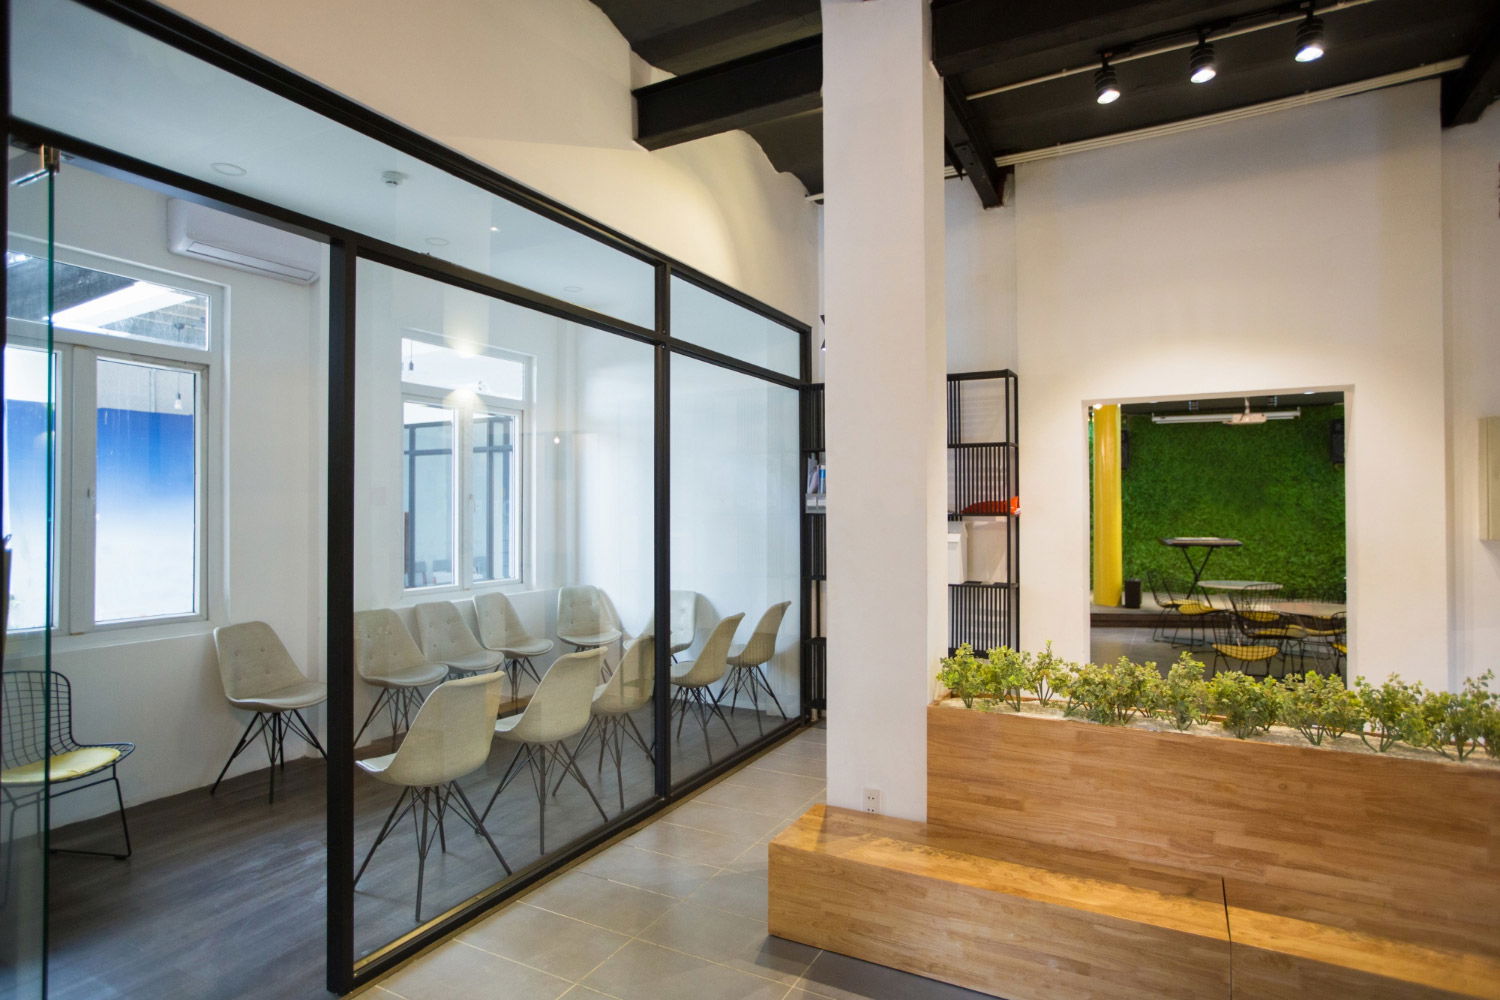 A meeting room with a glass wall and chairs.